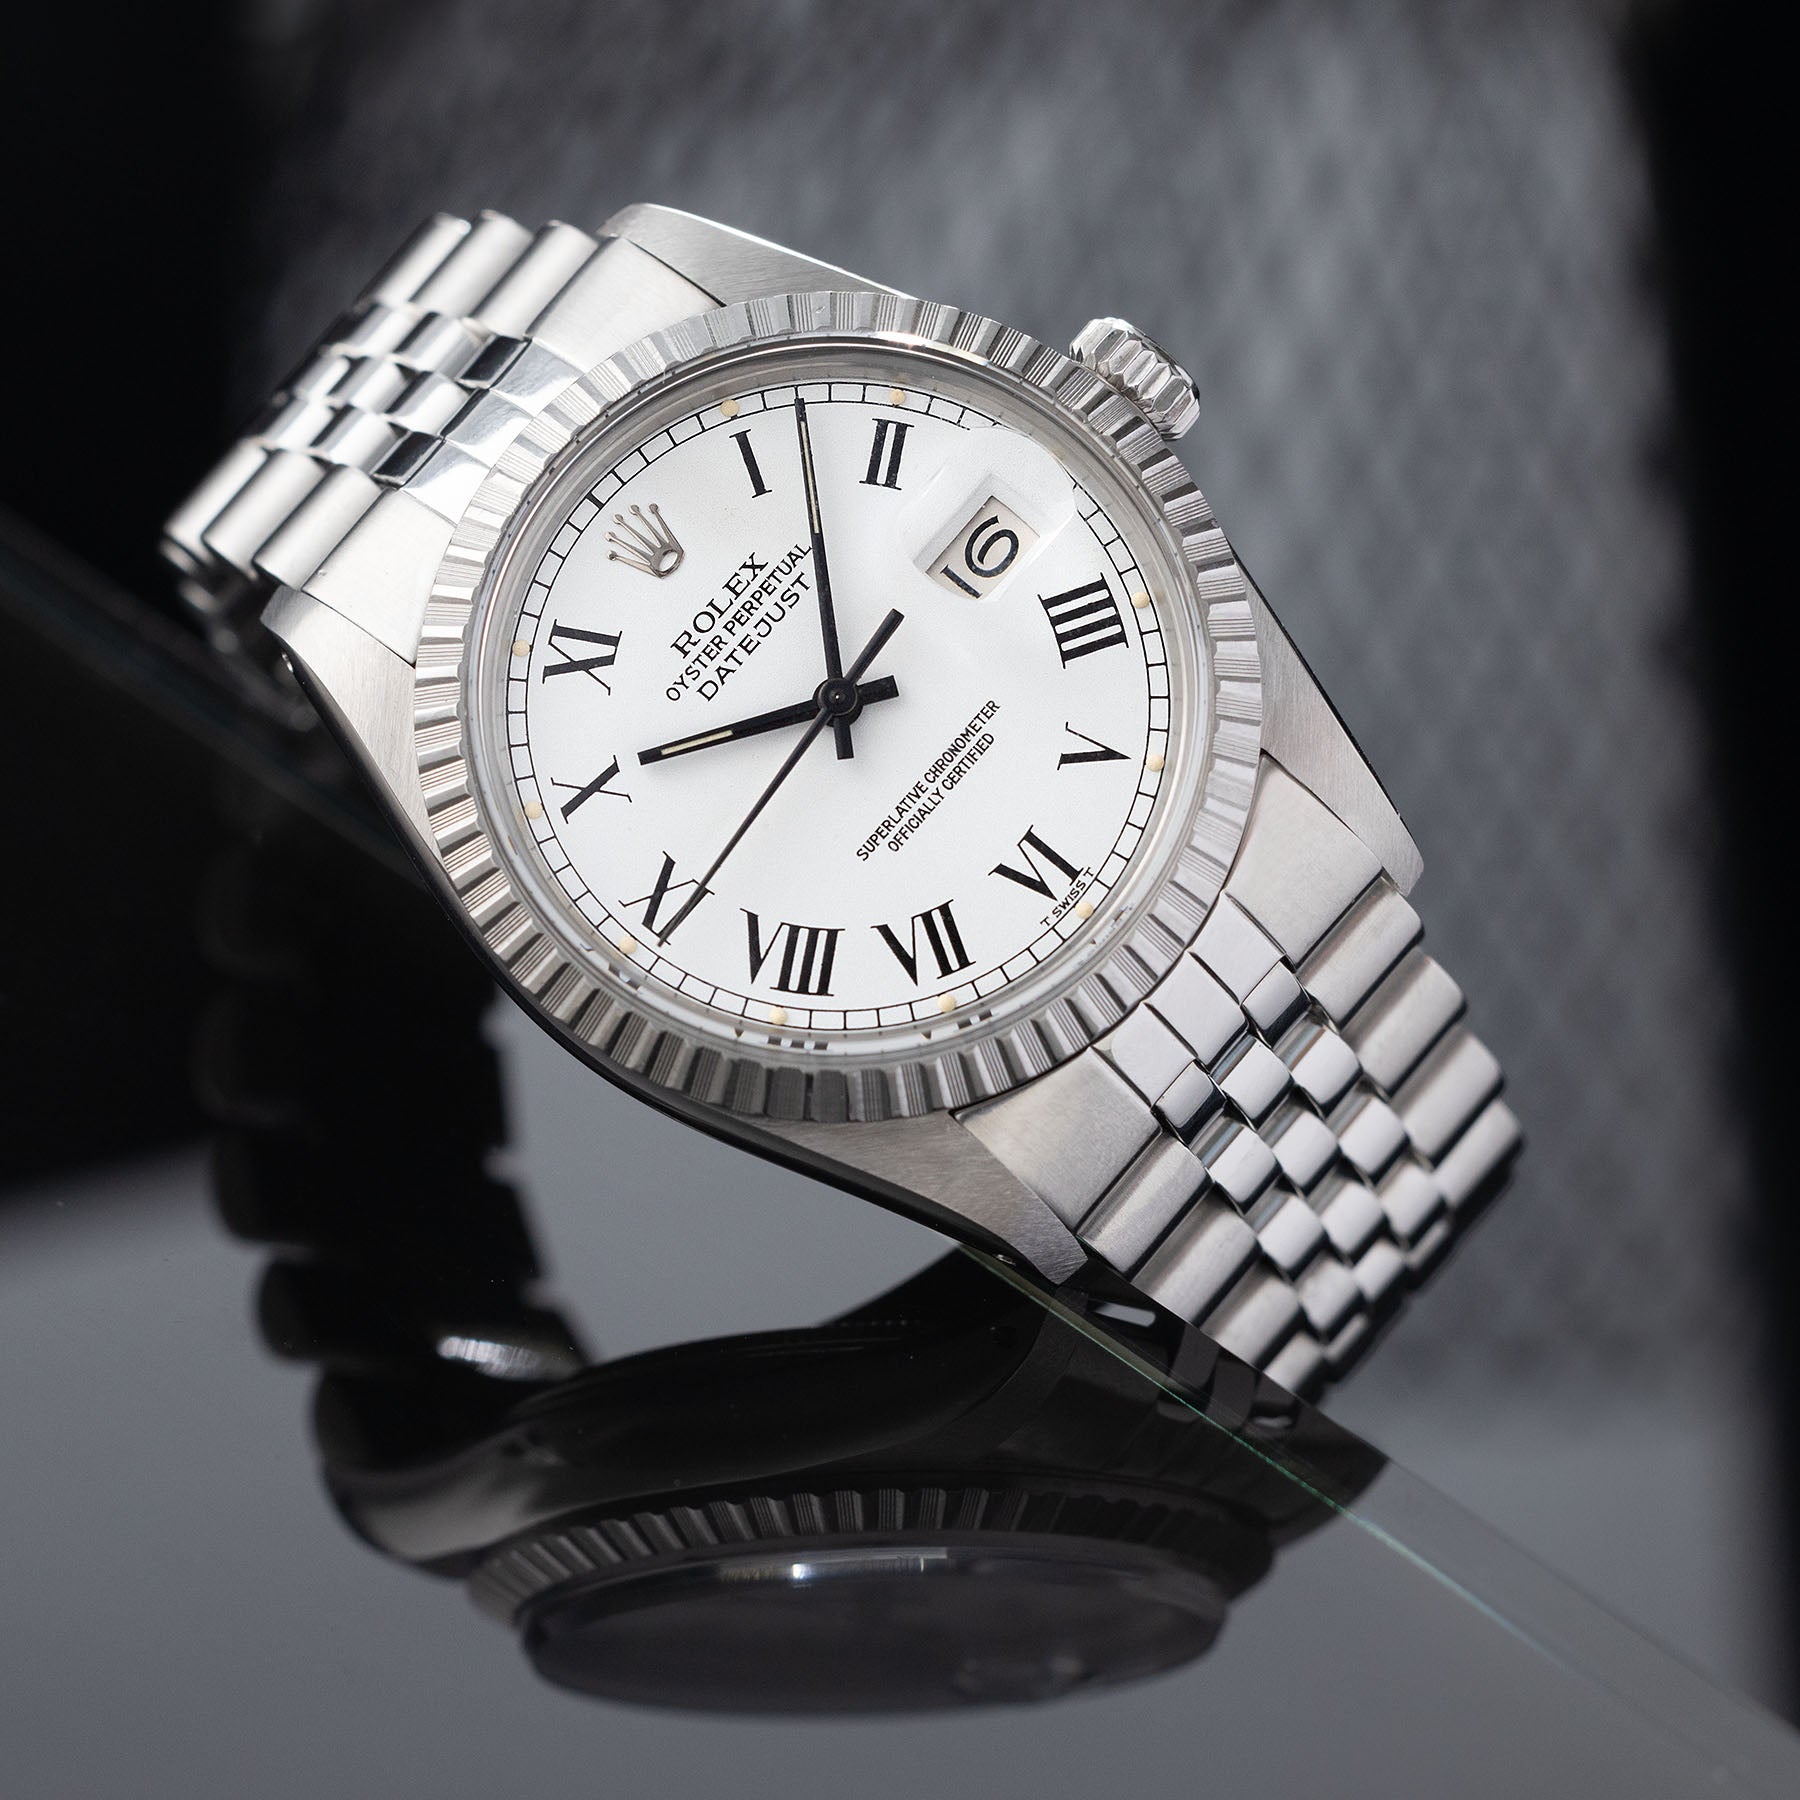 Rolex Datejust 16030 White Buckley Dial with Guarantee Papers